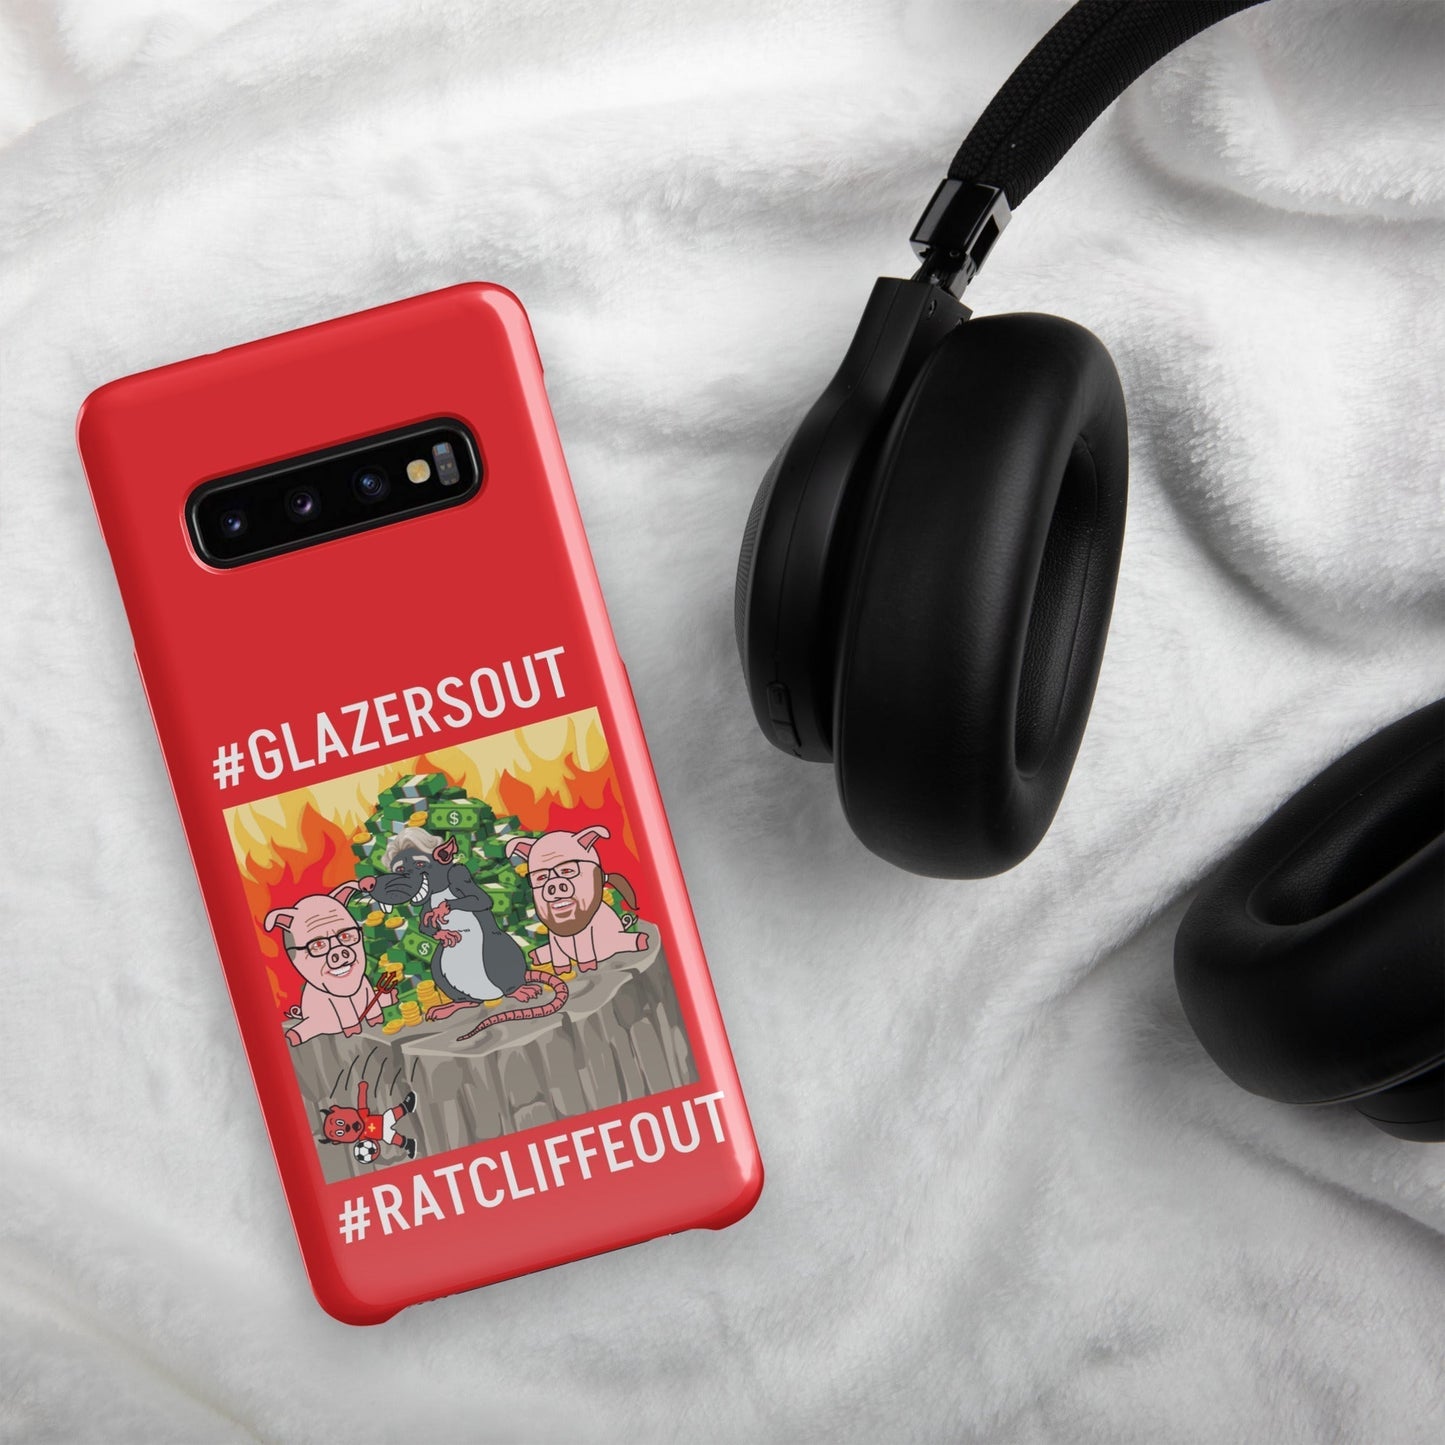 Manchester United Ratcliffe Out, Glazers Out Snap case for Samsung® red Next Cult Brand Football, GlazersOut, Manchester United, RatcliffeOut